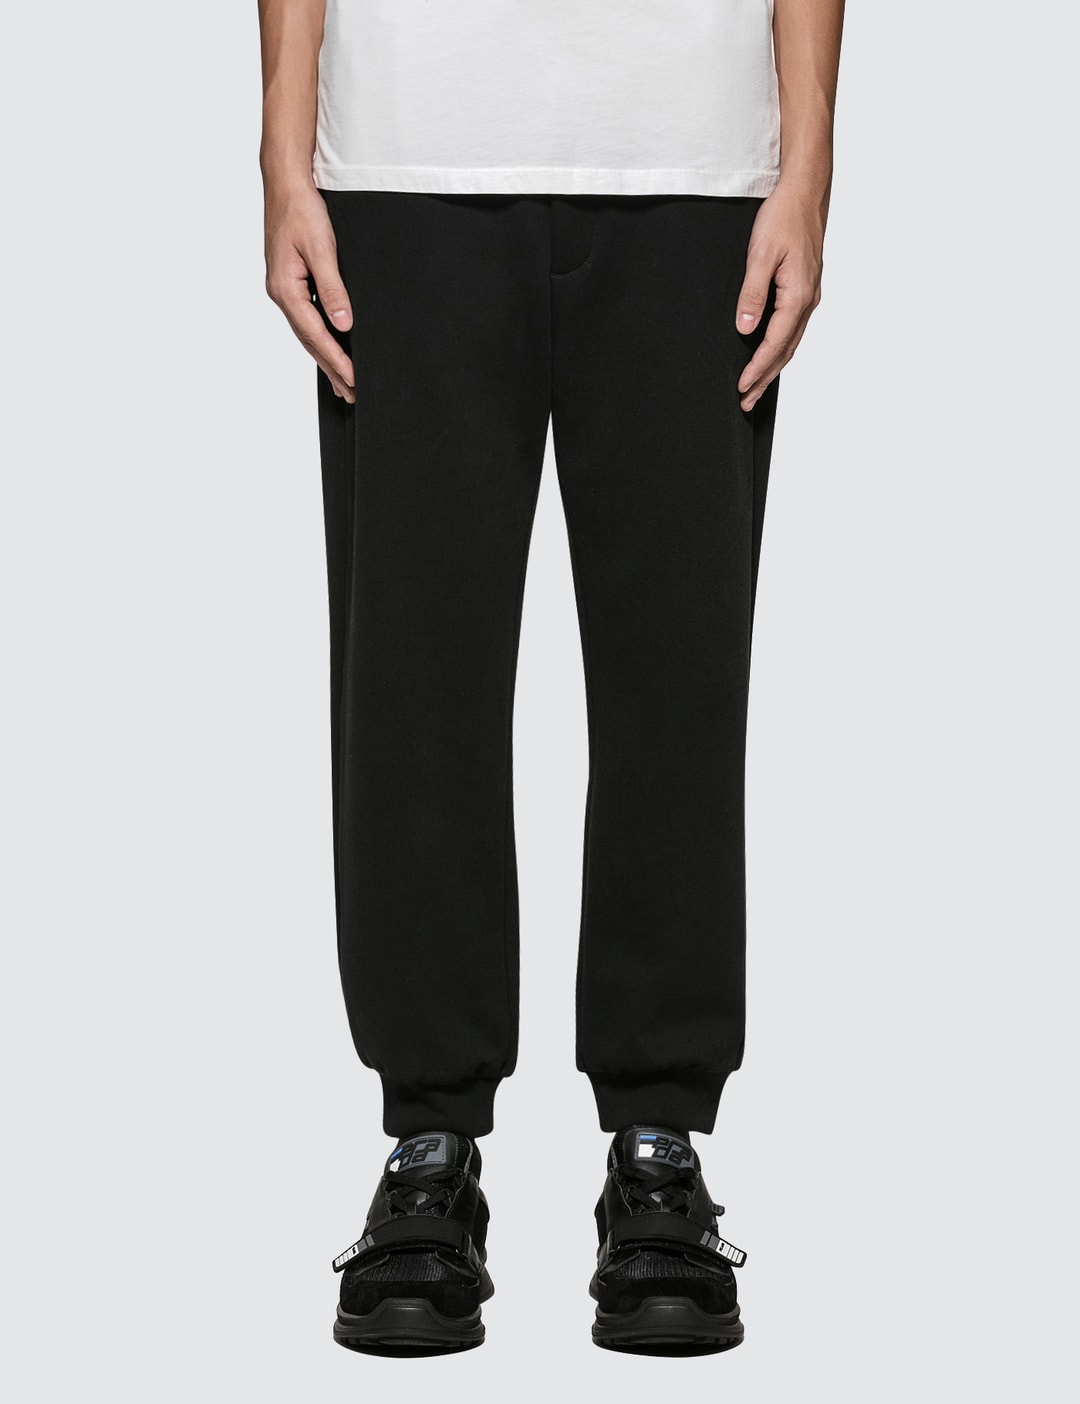 Prada - Jersey Jogger | HBX - Globally Curated Fashion and Lifestyle by ...